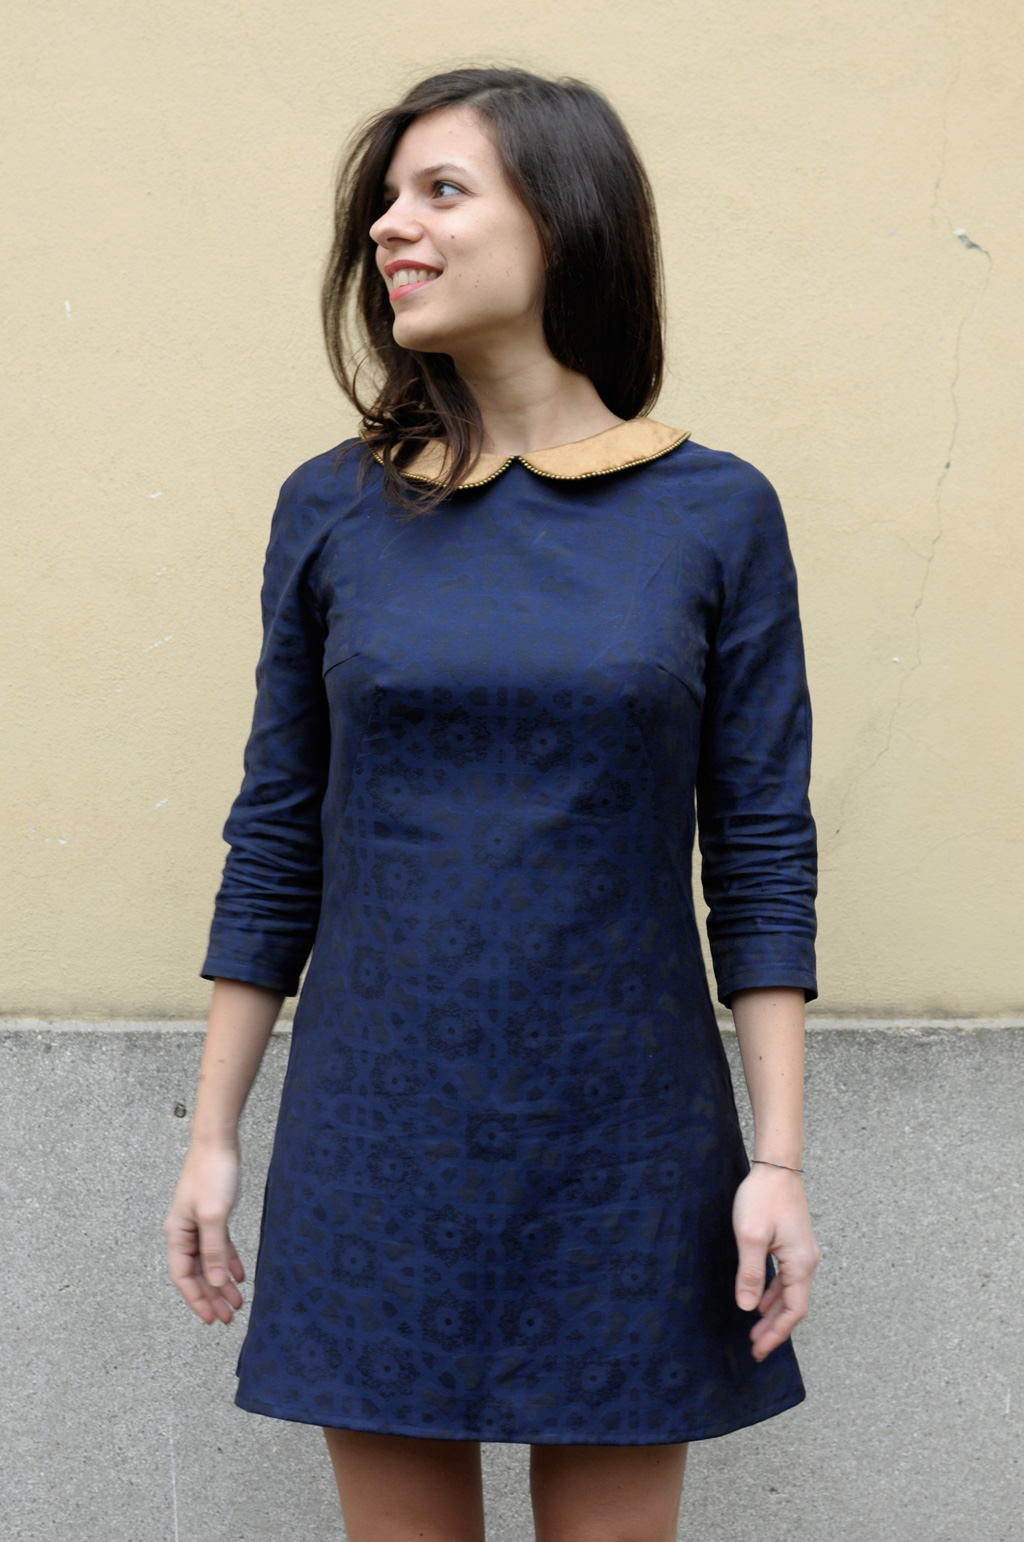 ladulsatina Francoise Dress Tilly and the Buttons 